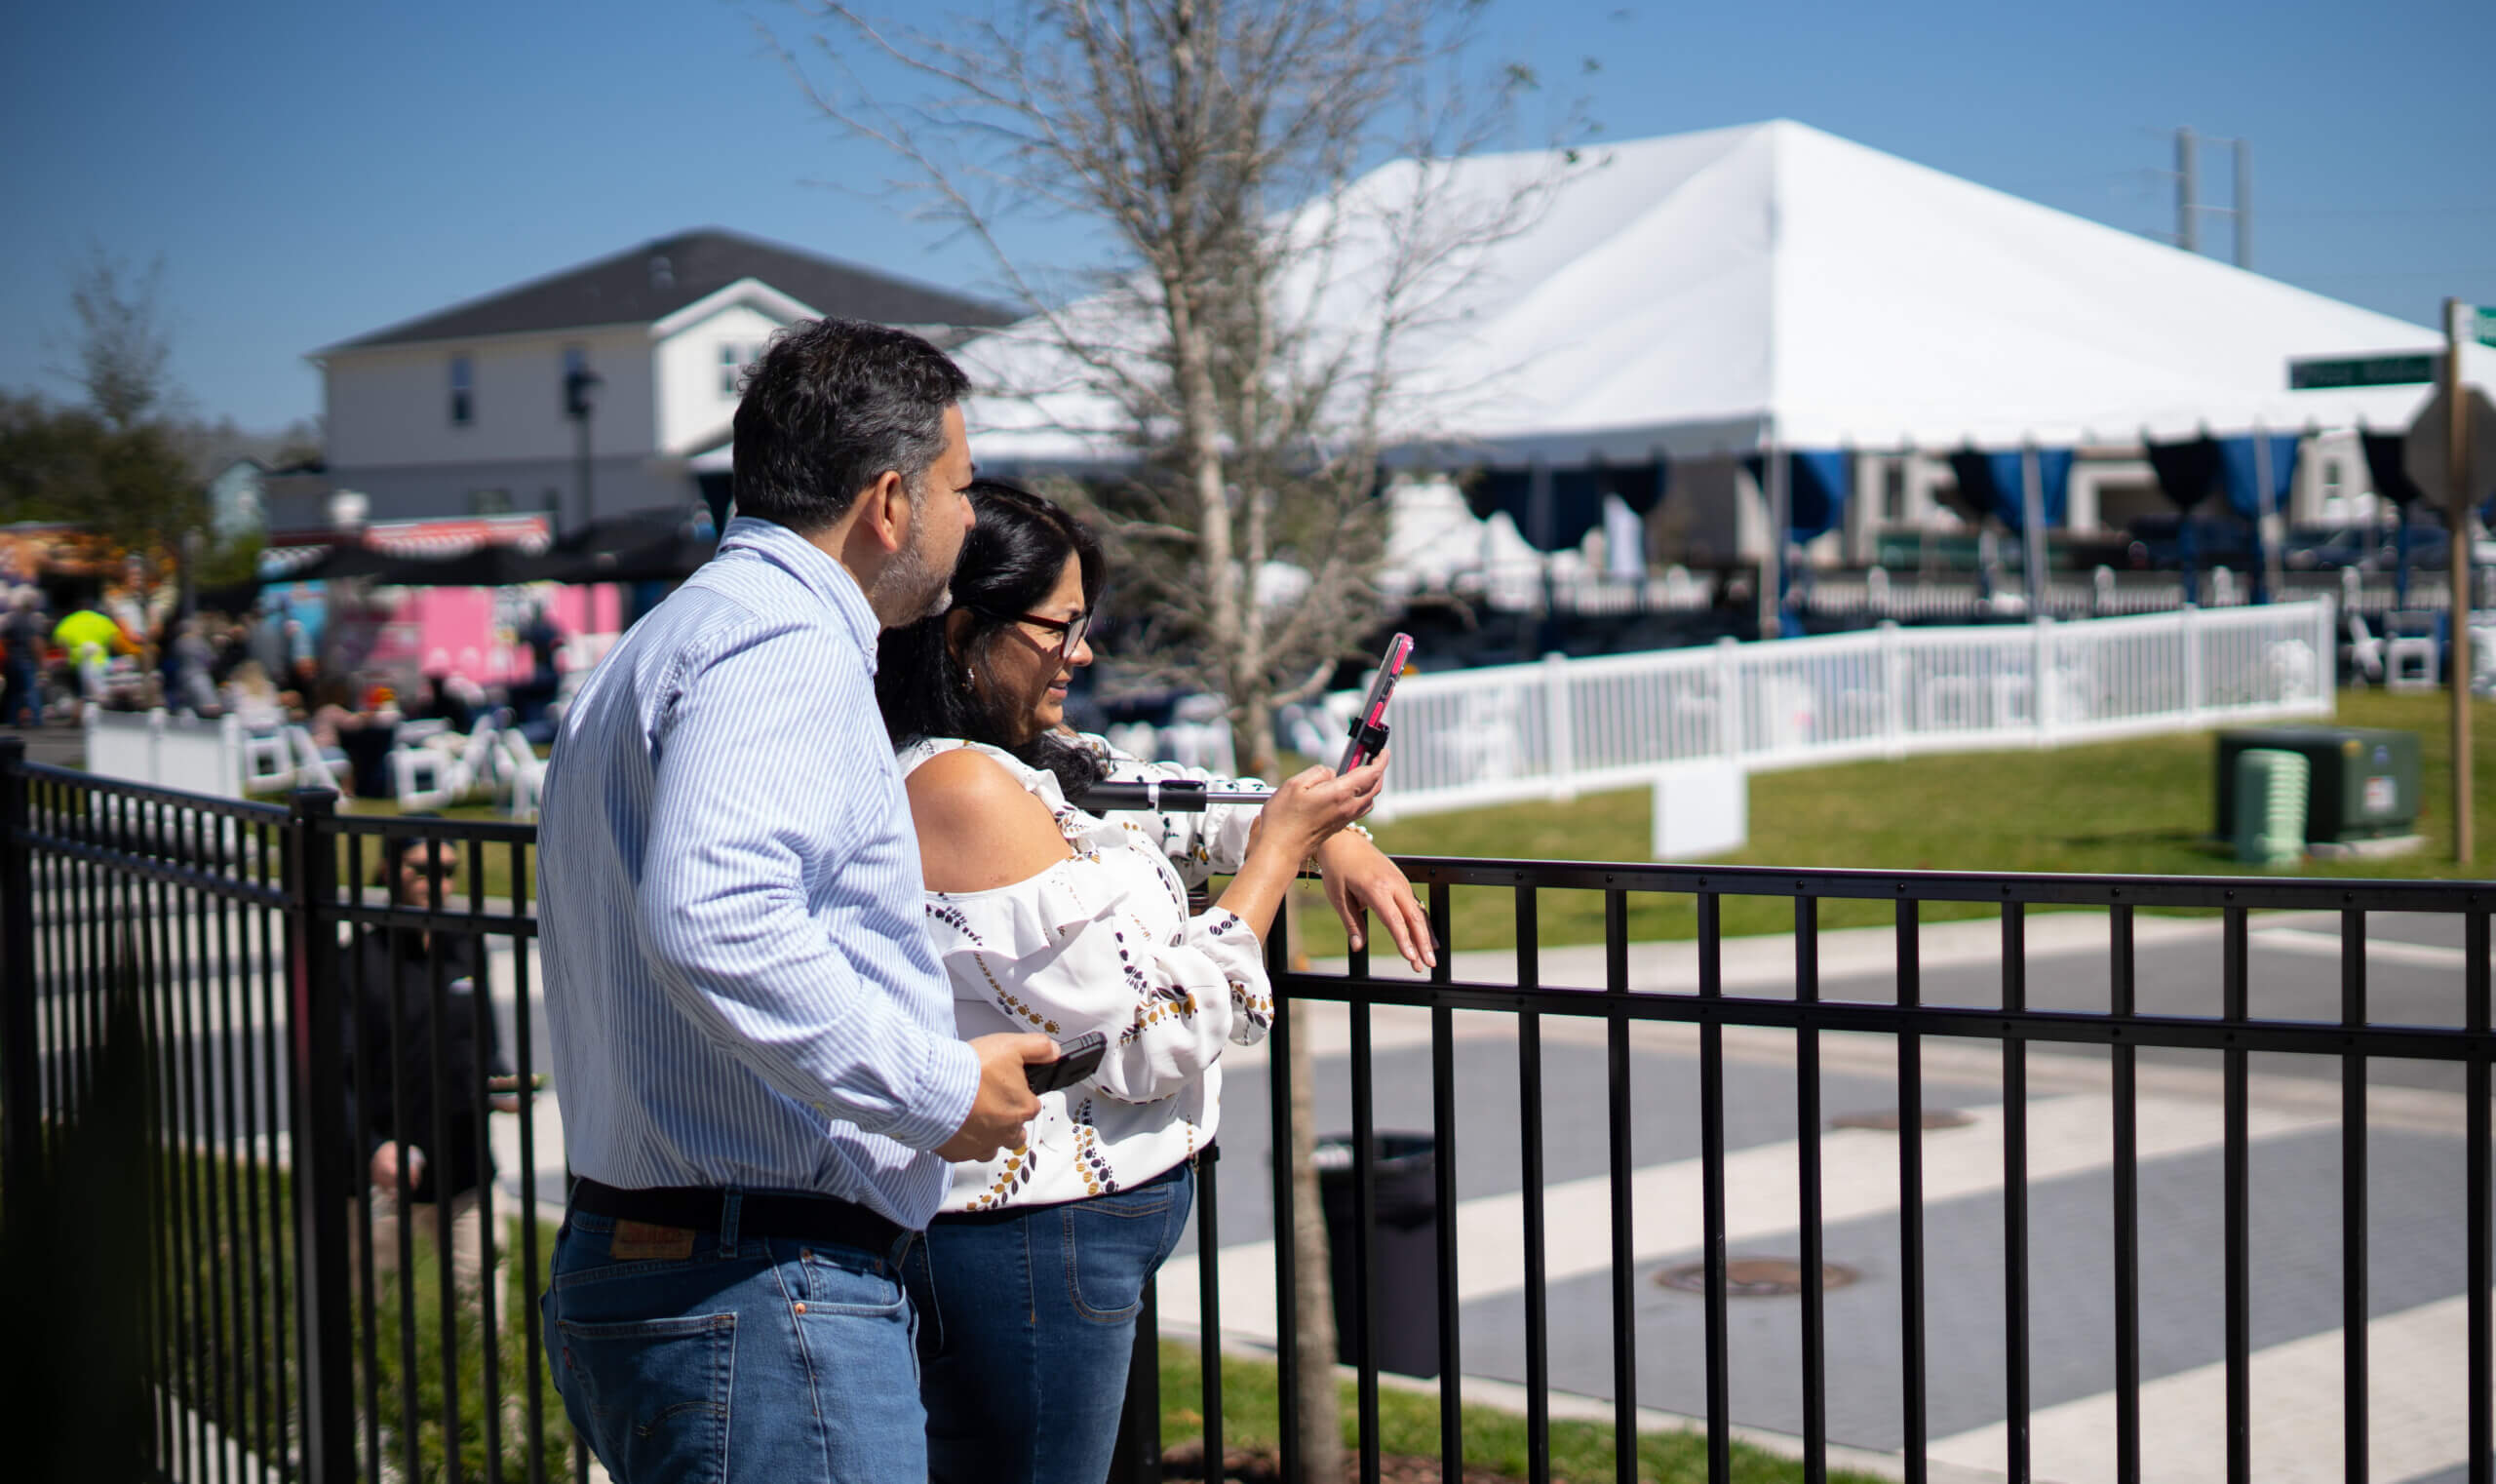 Homebuyers gathered to celebrate the highly anticipated grand opening of EverBe, Orlando’s newest master-planned neighborhood.